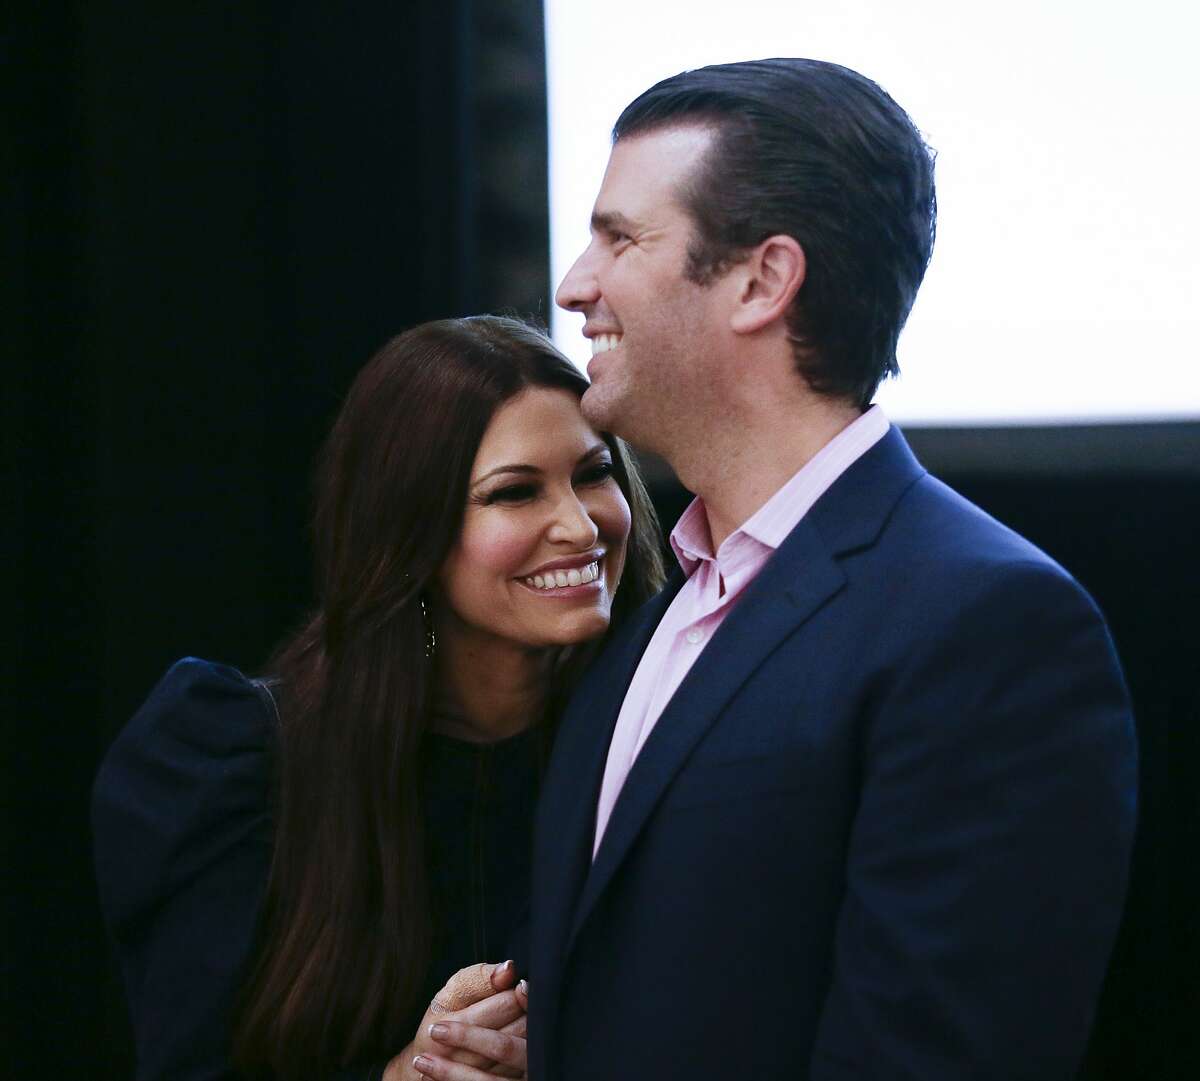 Trump Was Less Than Thrilled About Don Jr Dating Kimberly Guilfoyle The Atlantic Writes